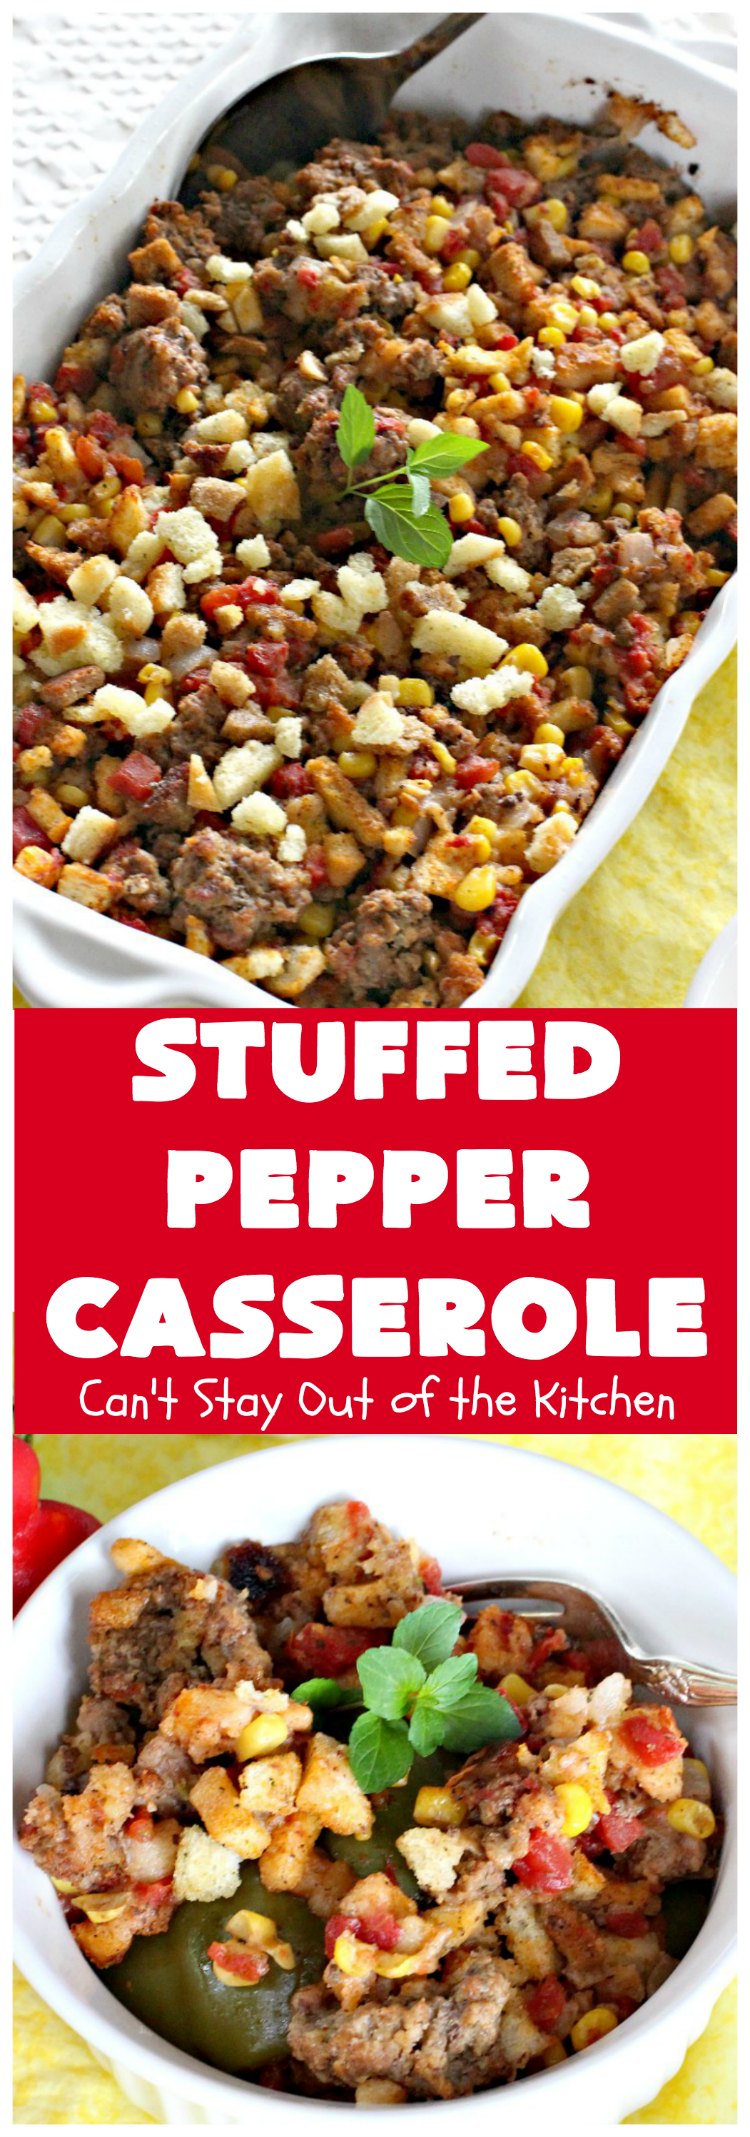 Stuffed Pepper Casserole  | Can't Stay Out of the Kitchen | this fantastic #GooseberryPatch #recipe is so delightful. If you enjoyed #StuffedBellPeppers you'll love this #casserole version which uses #HerbStuffingMix instead. Quick & easy to prepare weeknight dinner meal, too. #beef #GroundBeef #BellPeppers #corn #StuffedPepperCasserole